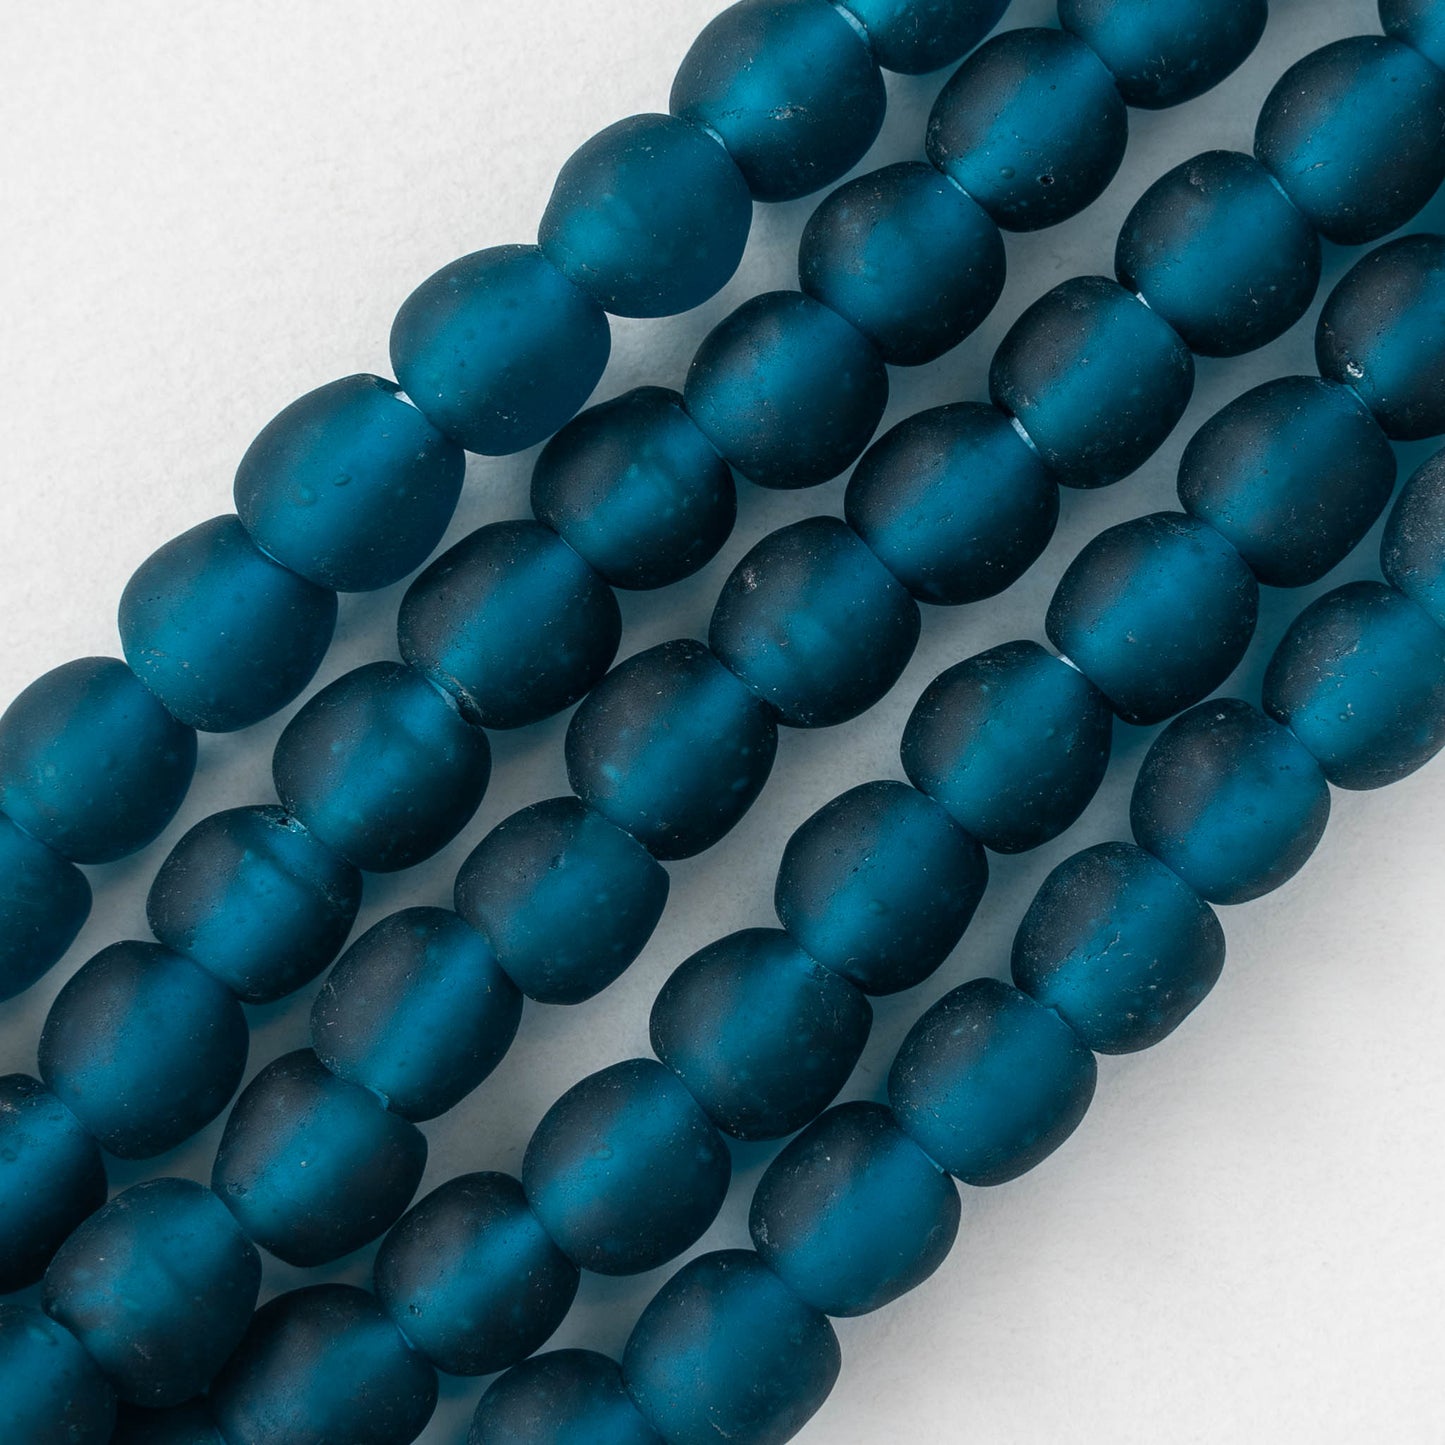 Round Glass Beads - 10-11mm - Teal - 10 Inches